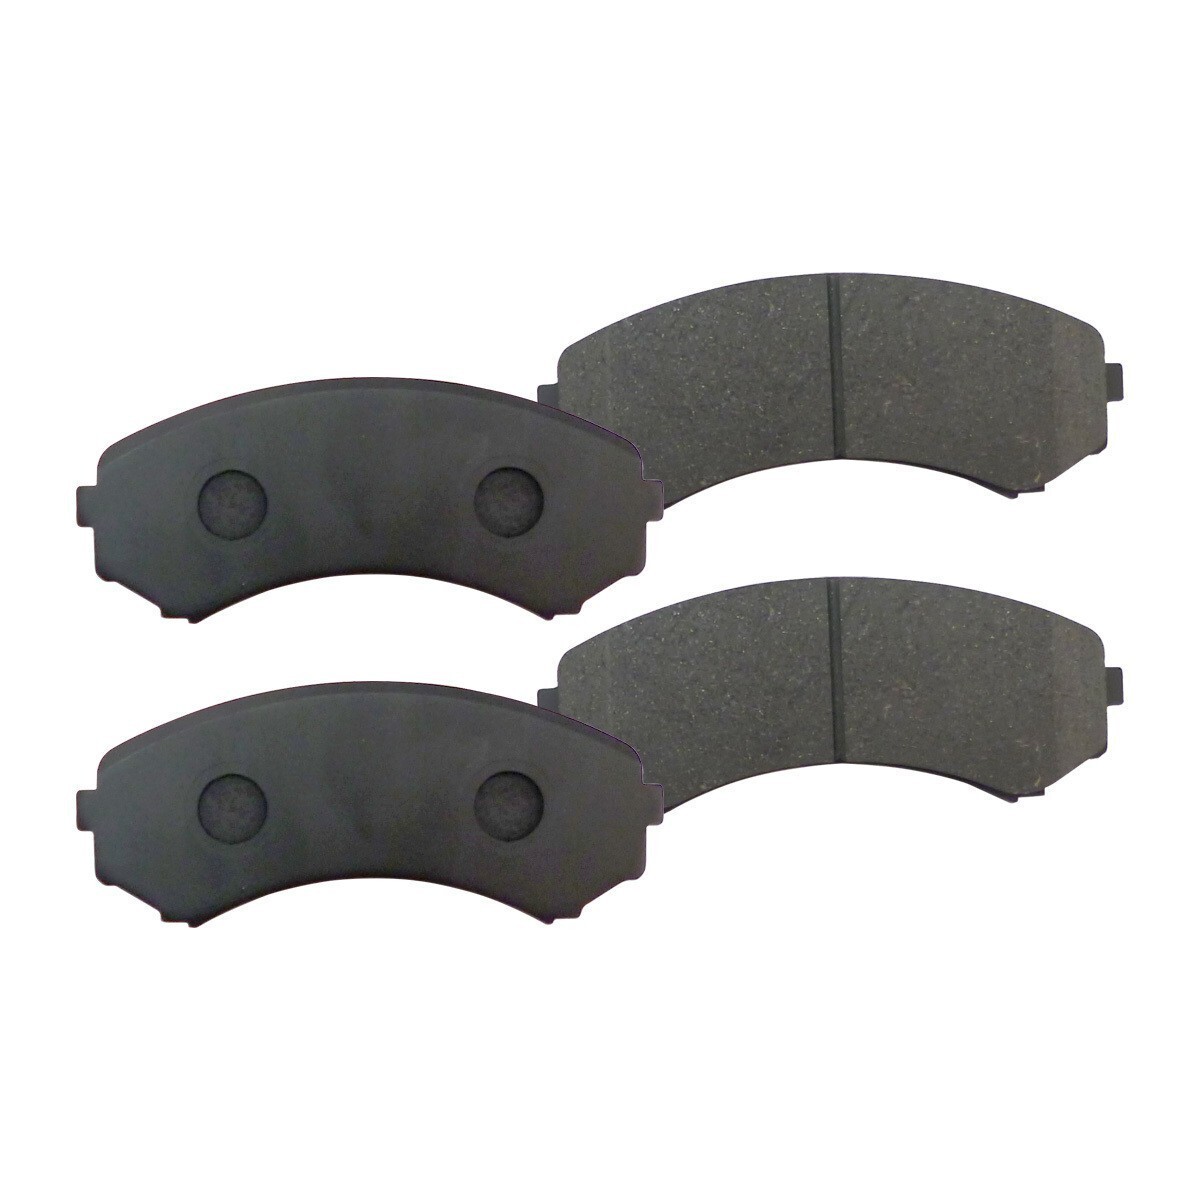  Vanette SK22LN SK22MN SK22TN SK22VN SK82LN SK82MN SK82TN SK82VN front brake pad left right set NAO material BP128